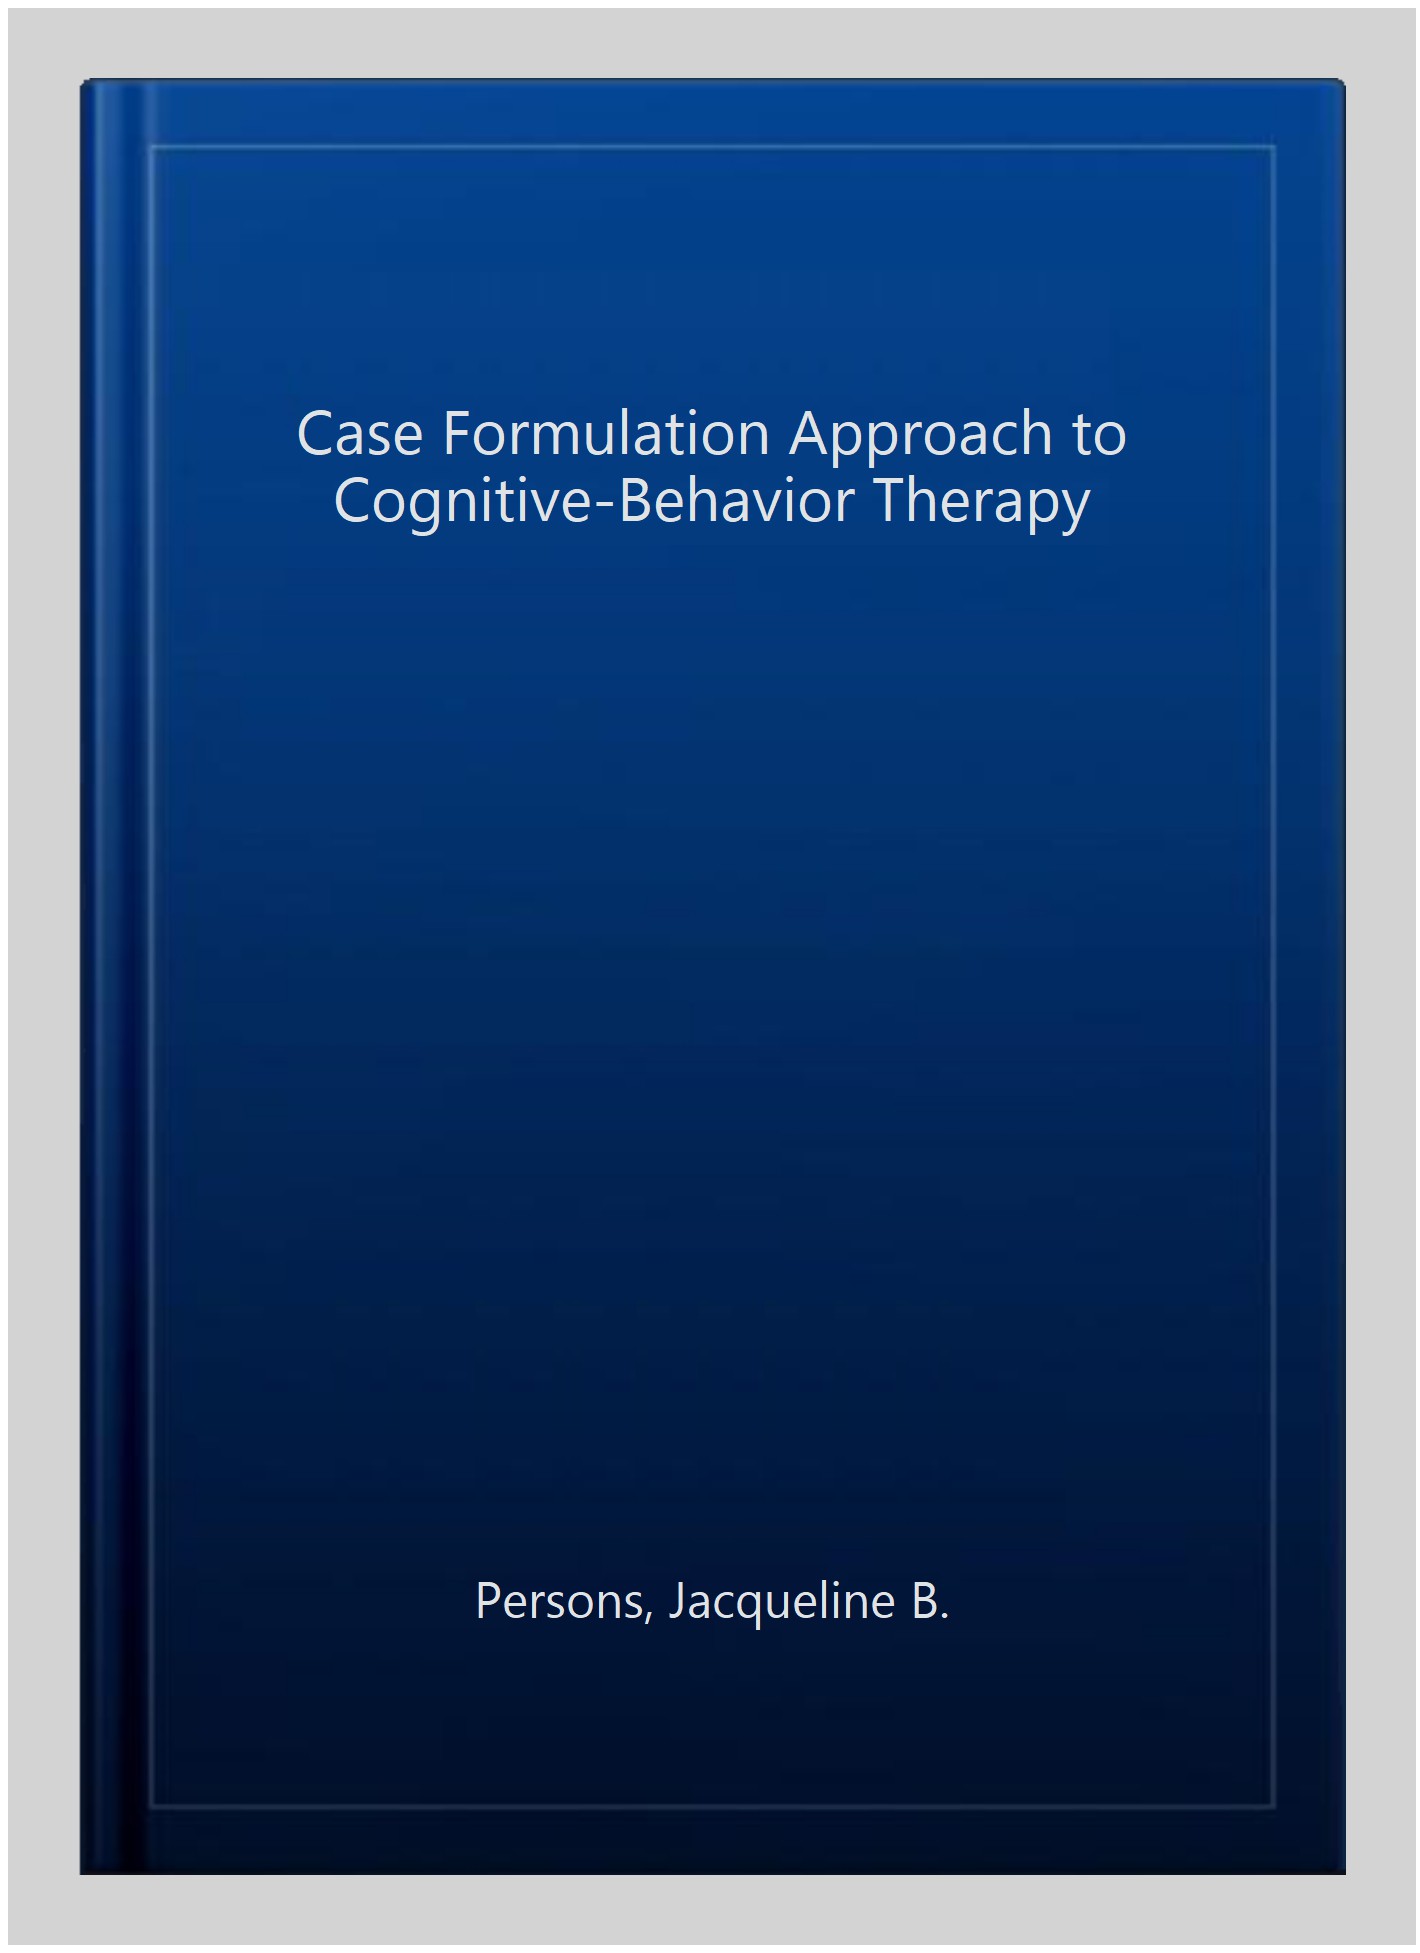 Jacqueline　ISBN　to　Approach　Formulation　Therapy,　B.,　9781462509485　Cognitive-Behavior　Persons,　Paperback　Case　1462509487,　ISBN-13　Pre-owned:　by